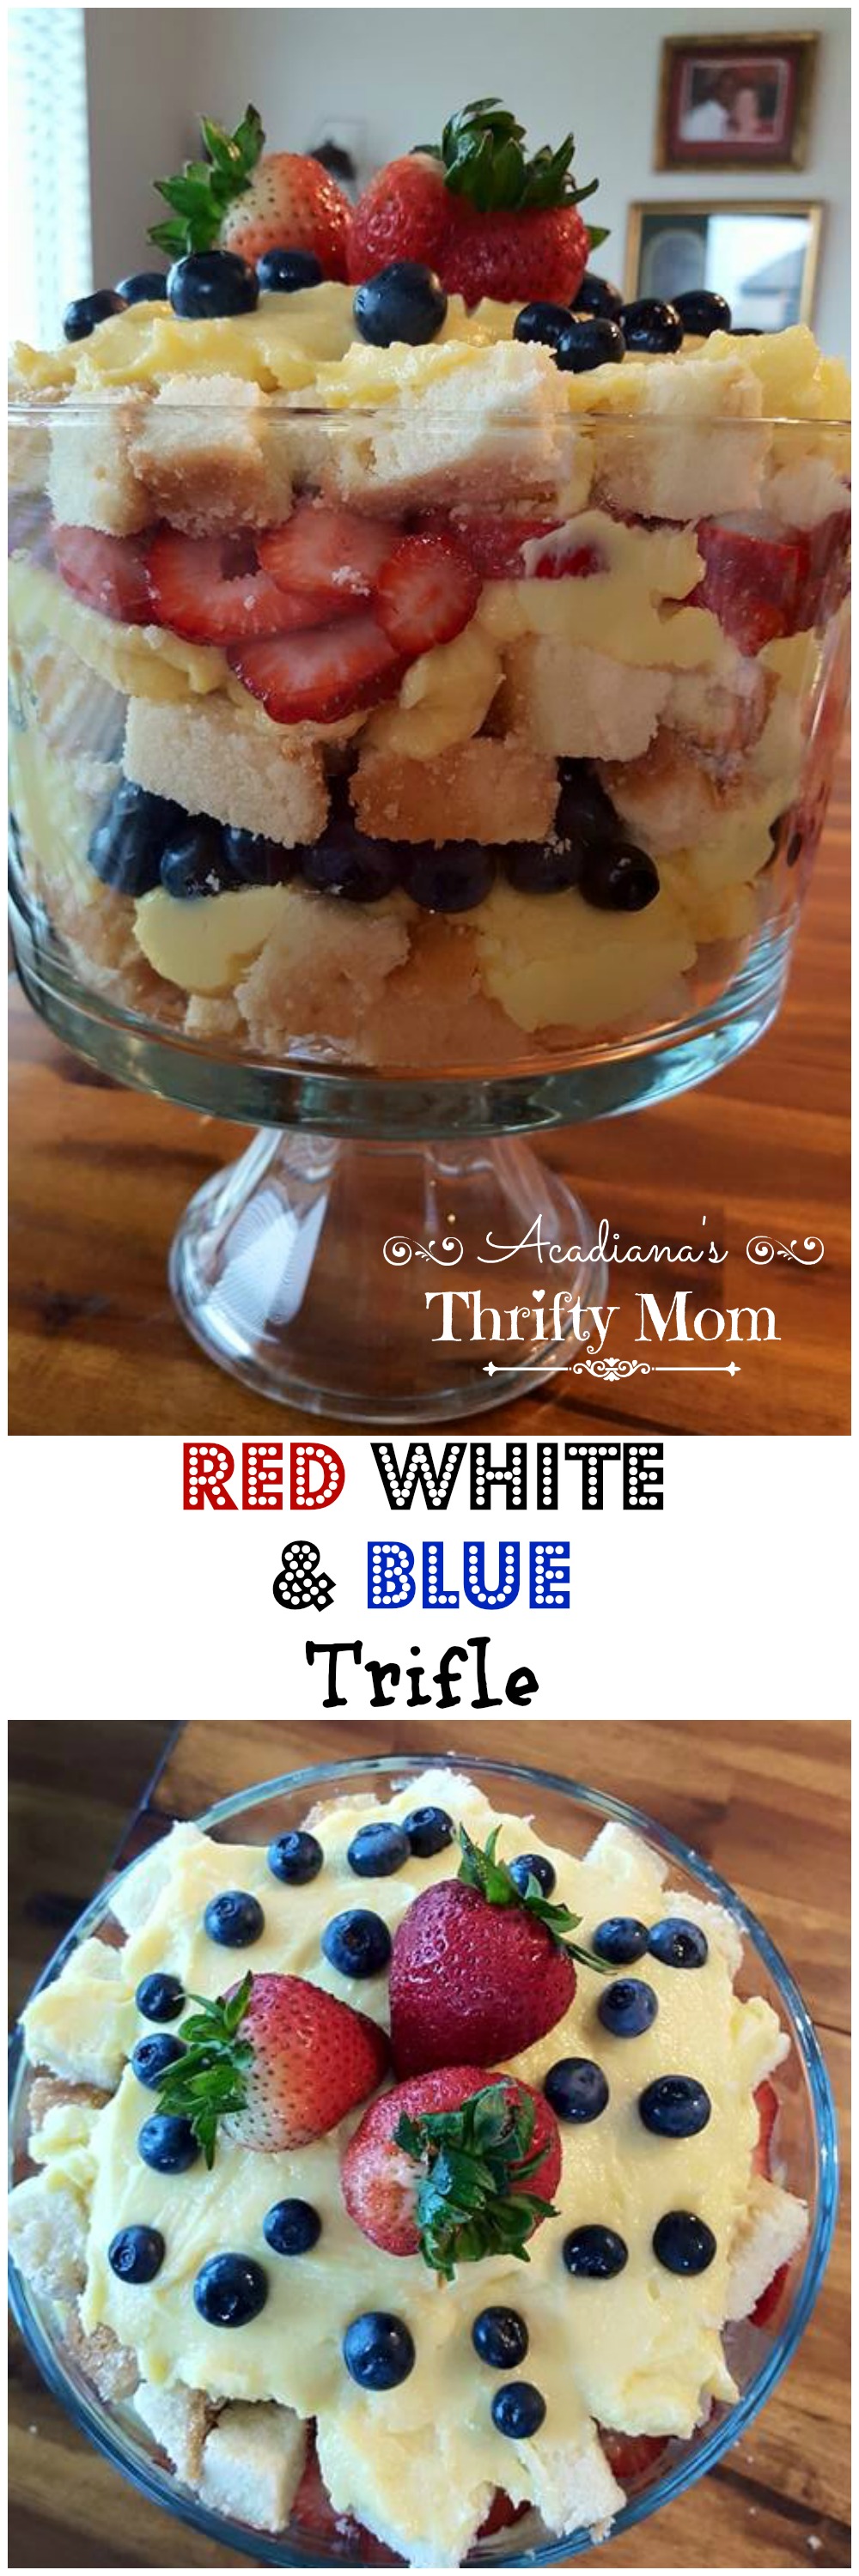 Red White And Blue Trifle